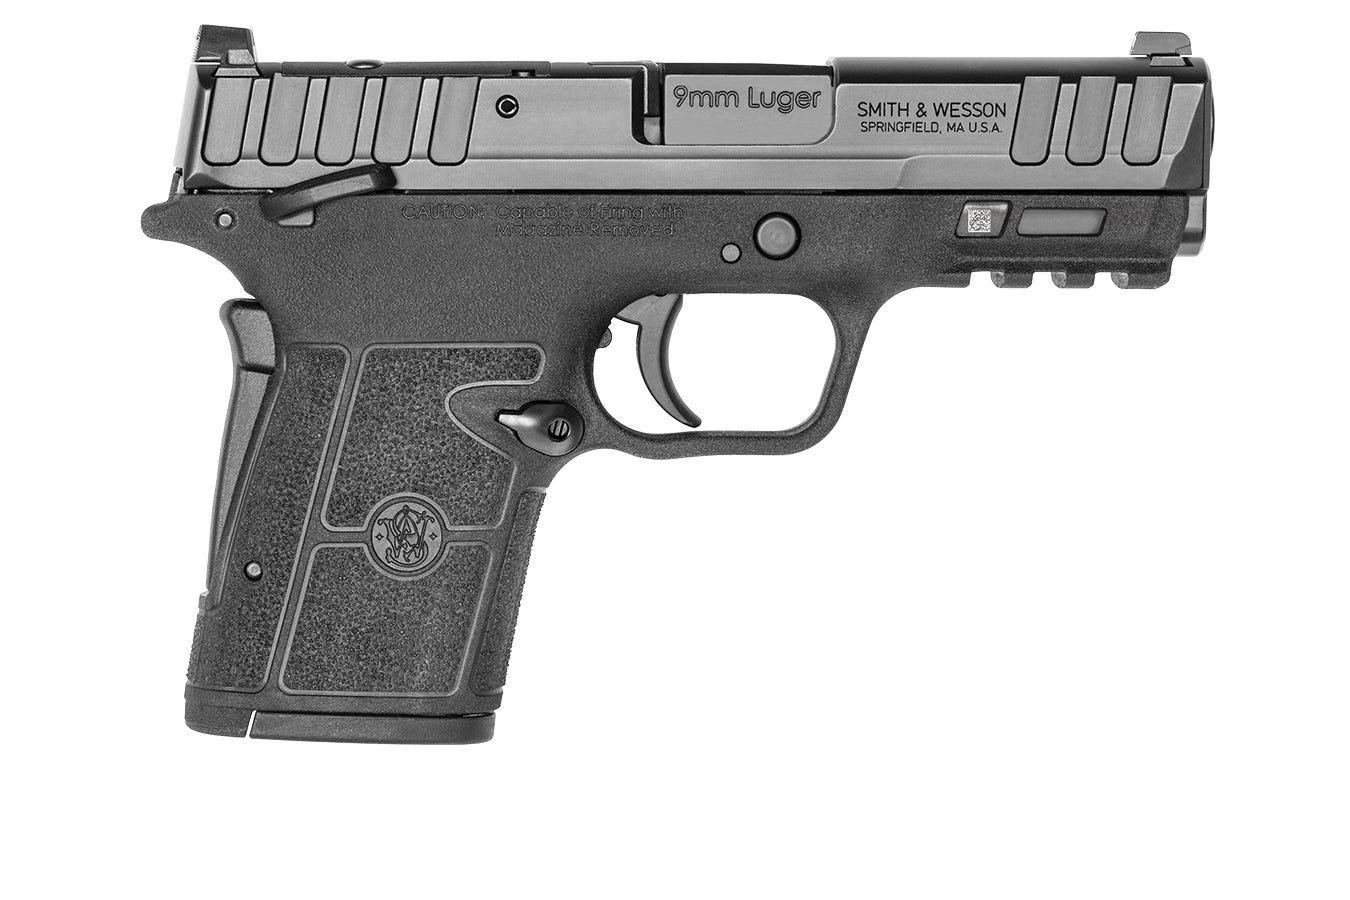 Smith and Wesson Equalizer 9mm 3.6" Barrel 15-Rounds Thumb Safety - $499.99 ($7.99 S/H on Firearms)